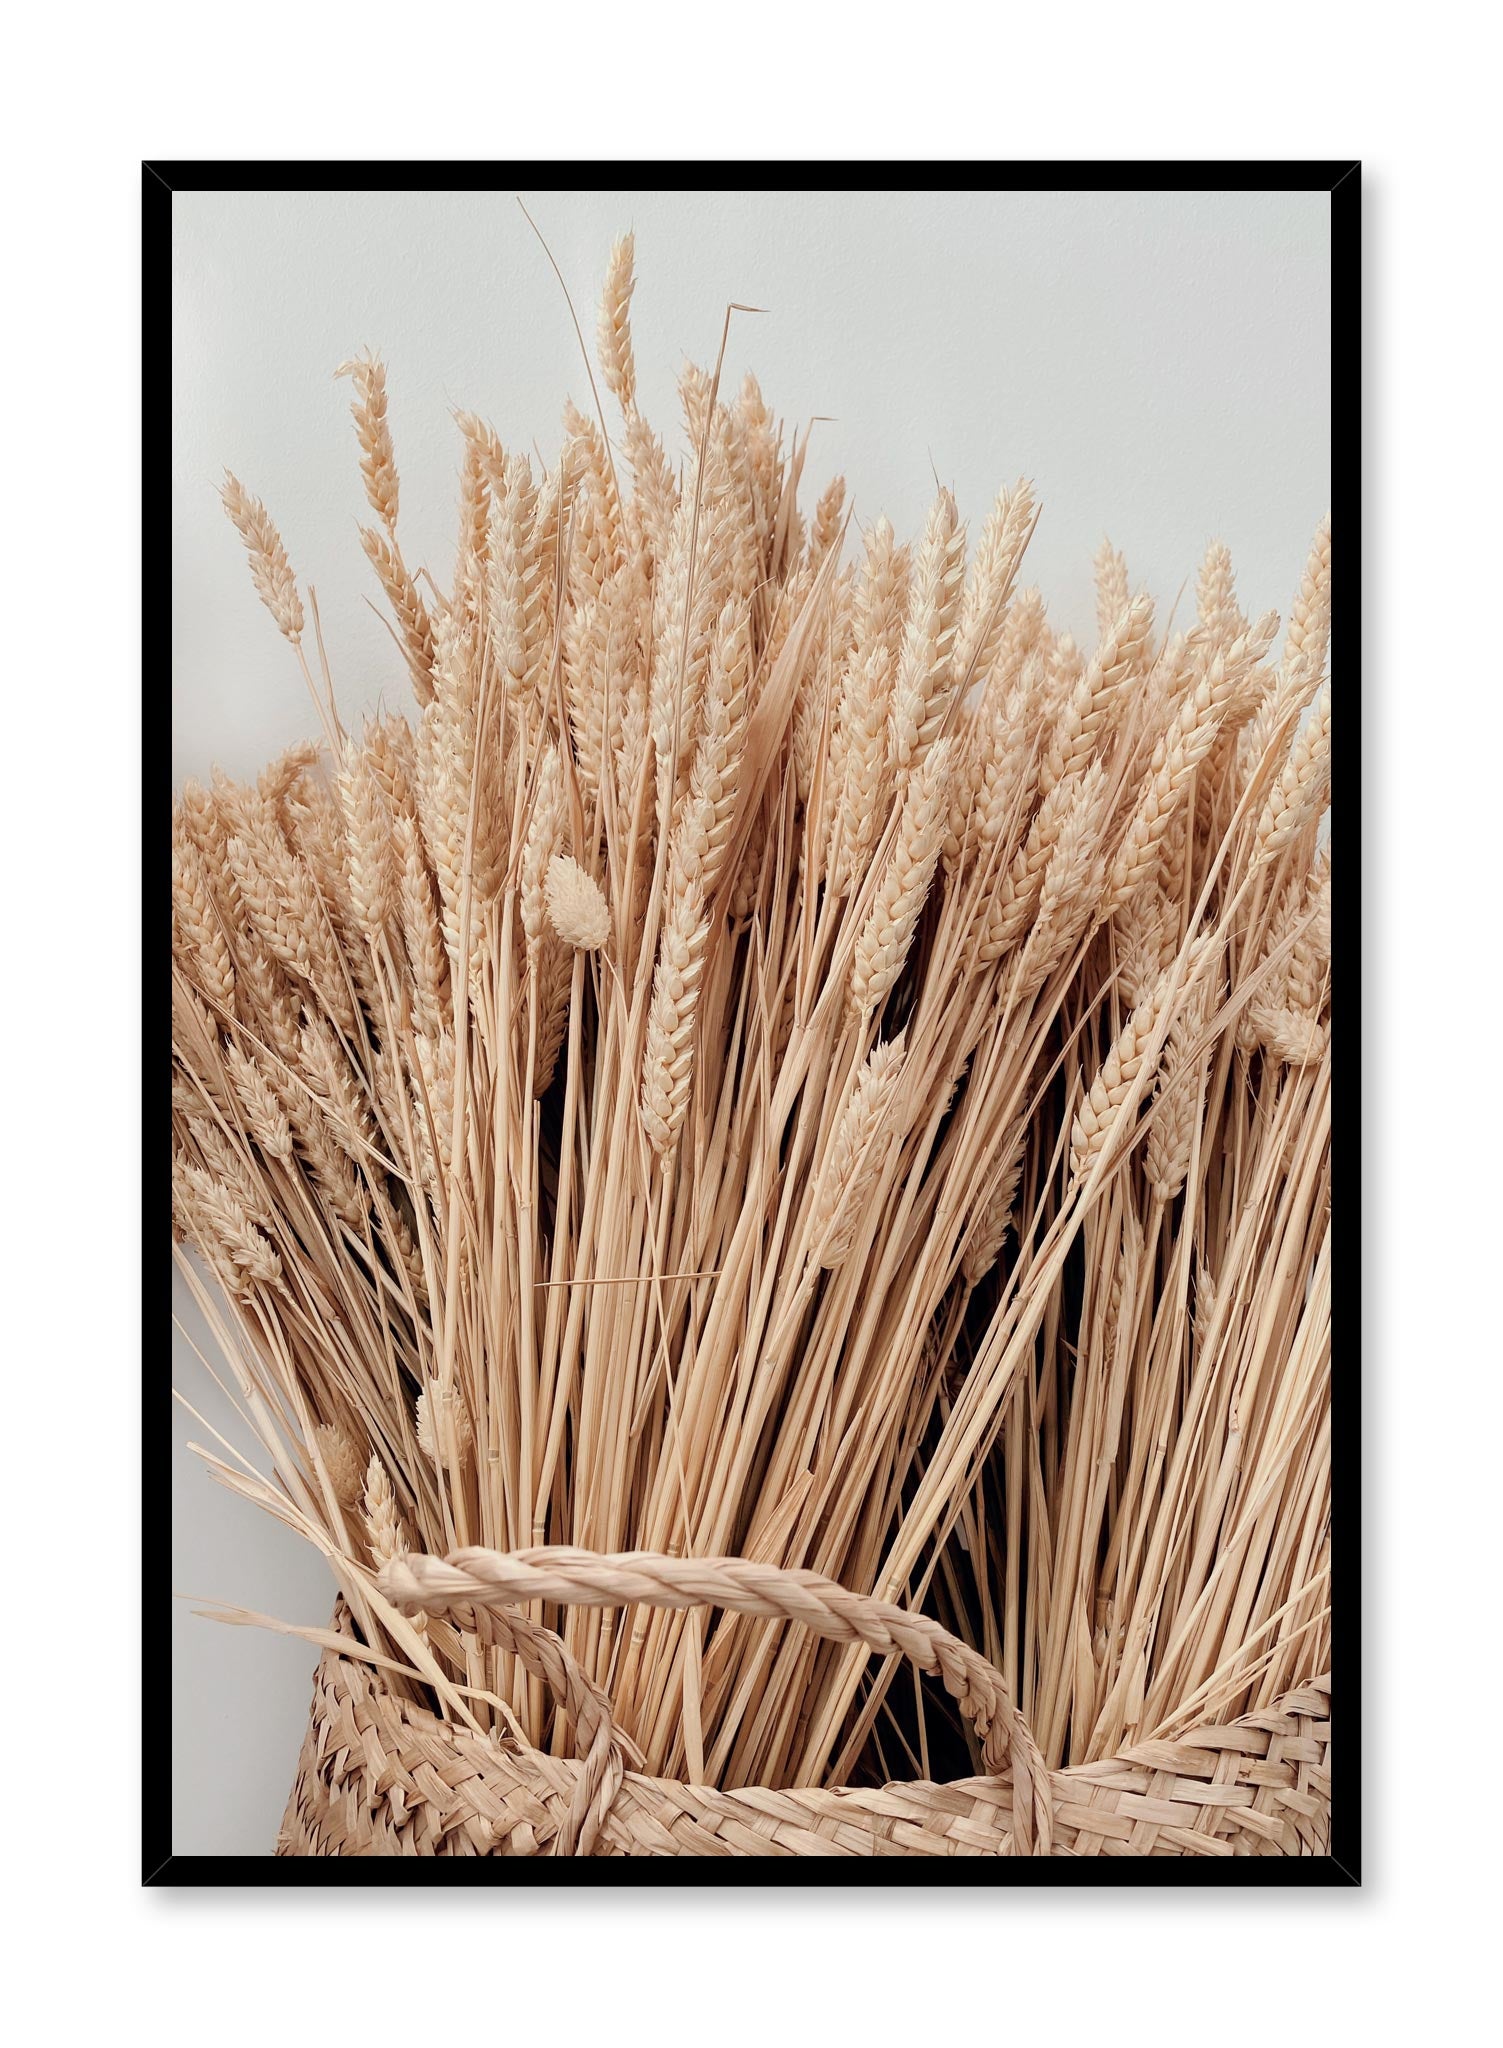 "Wheat Abundance" is a botanical photography poster by Opposite Wall of a weaved basket filled with beautiful rich blond and beige wheat grasses.